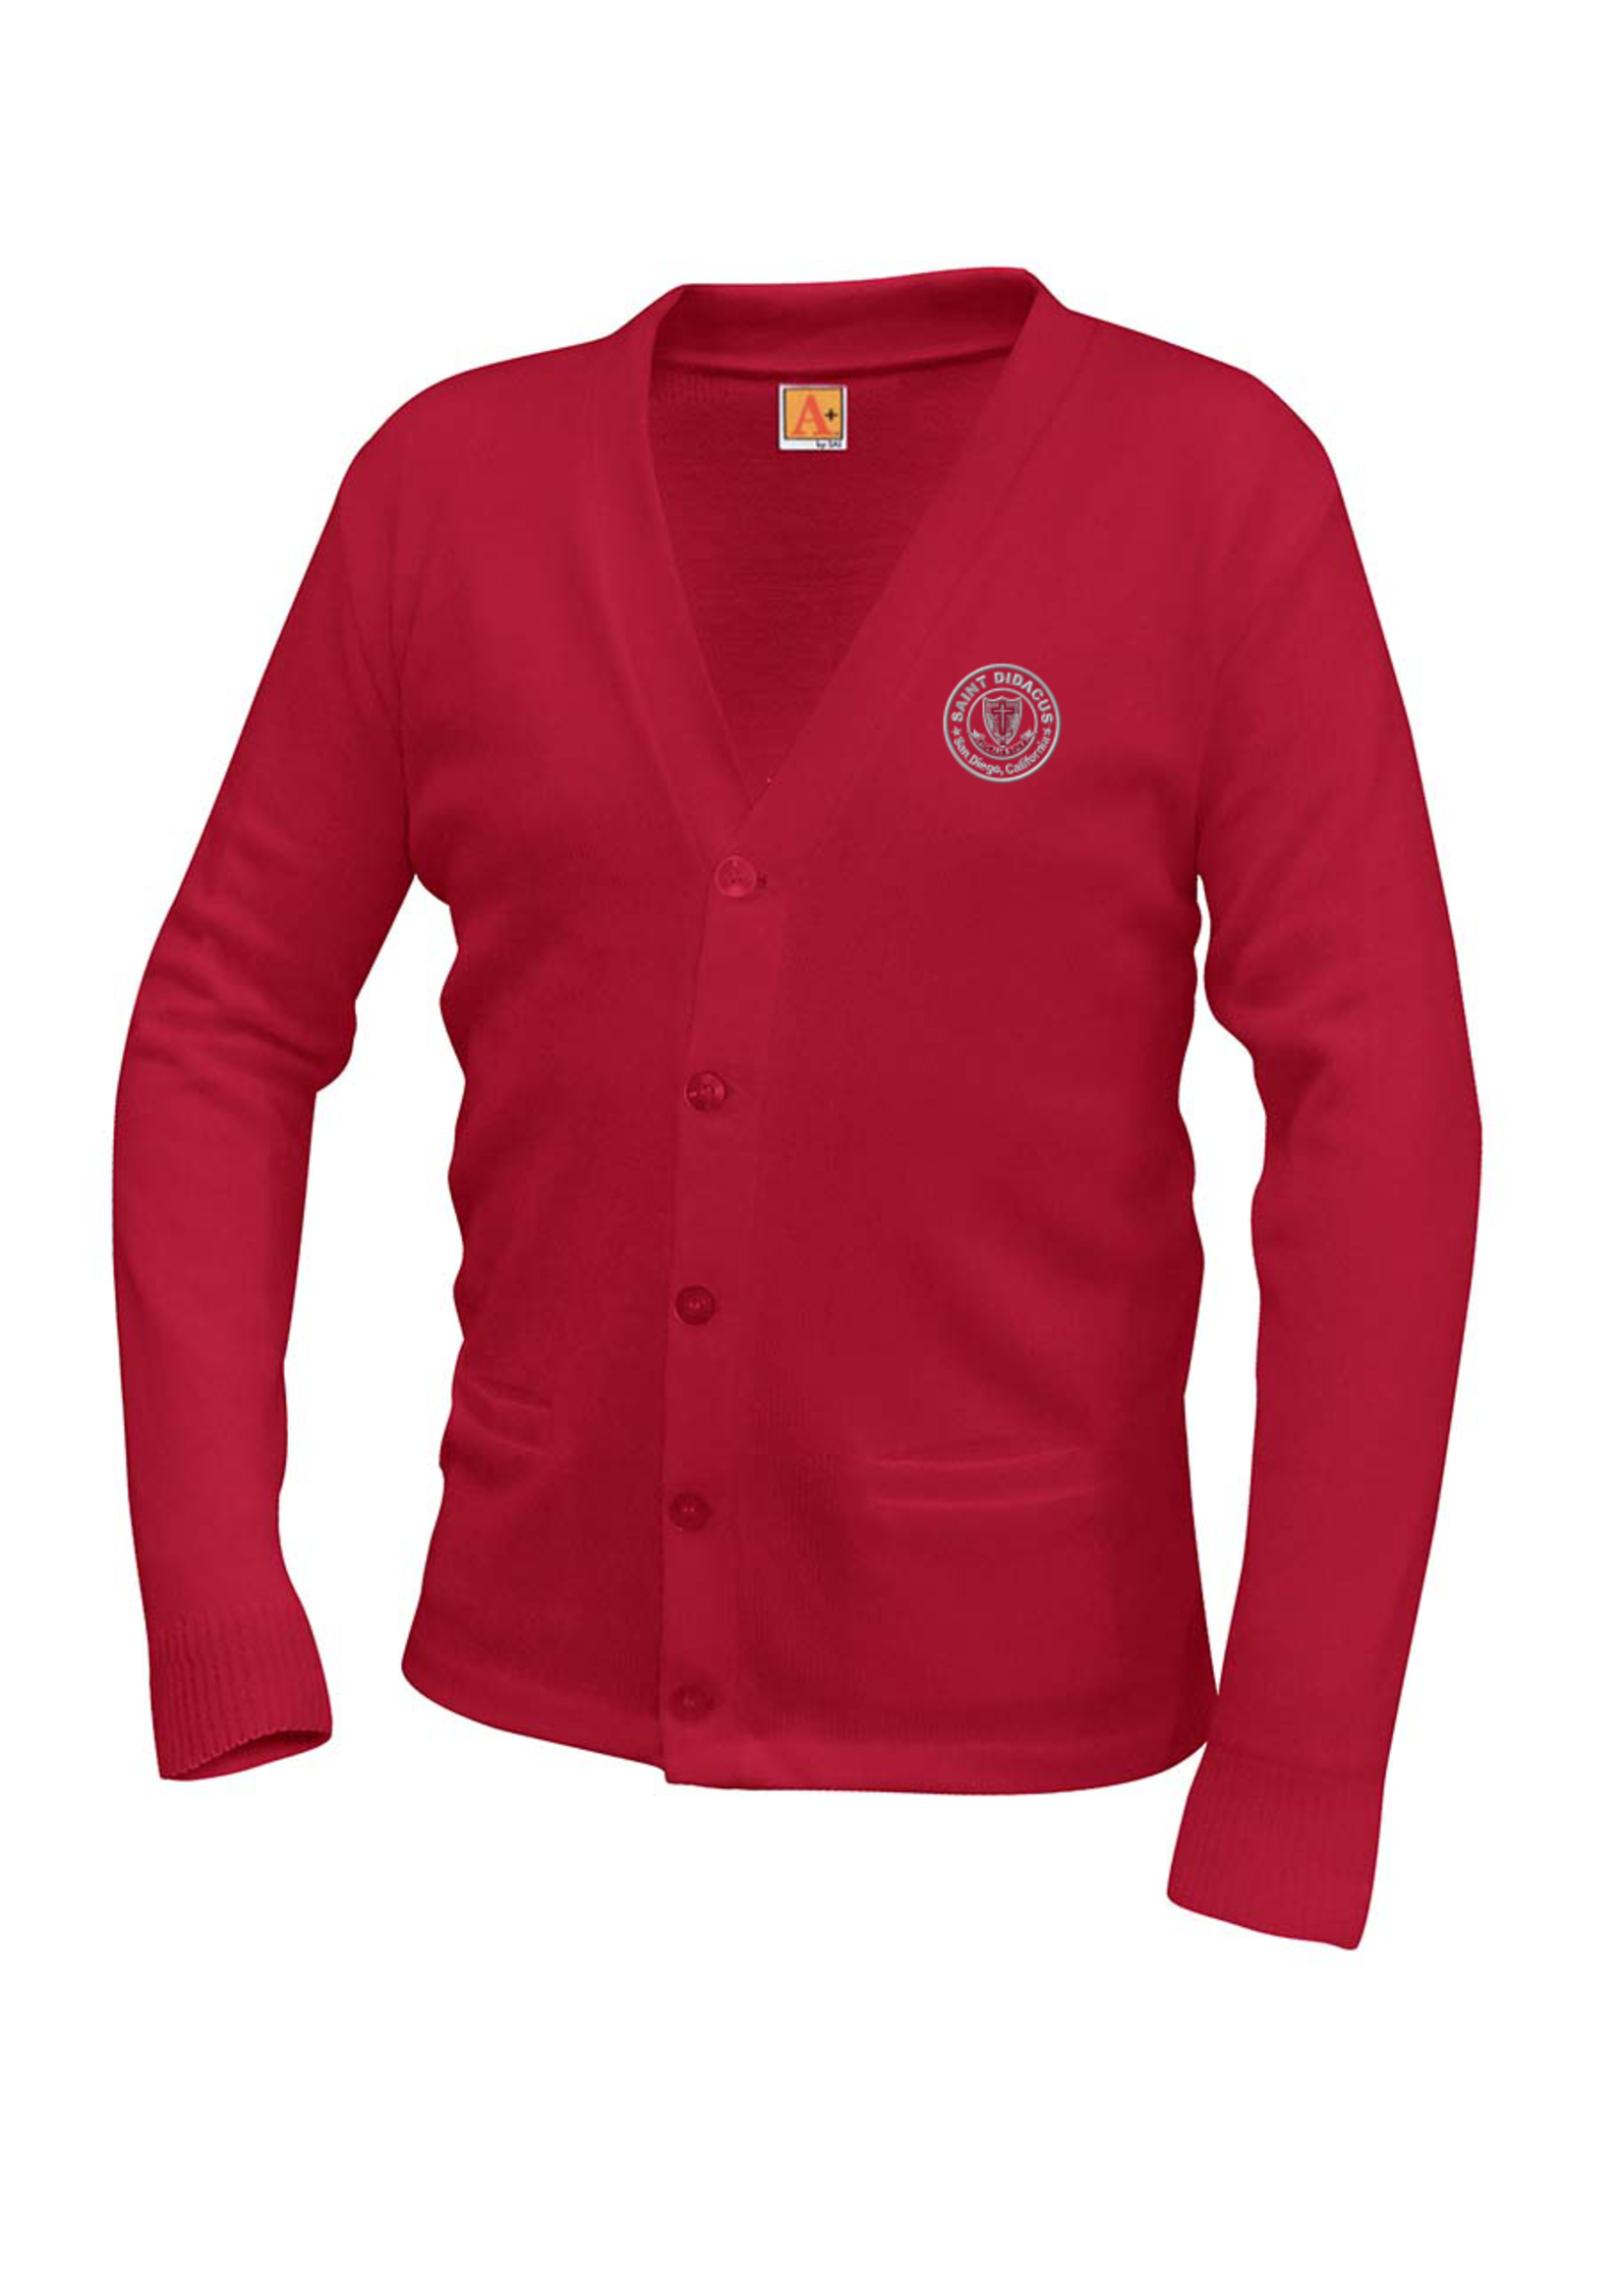 SDPS Red V-neck cardigan sweater with pockets K-6